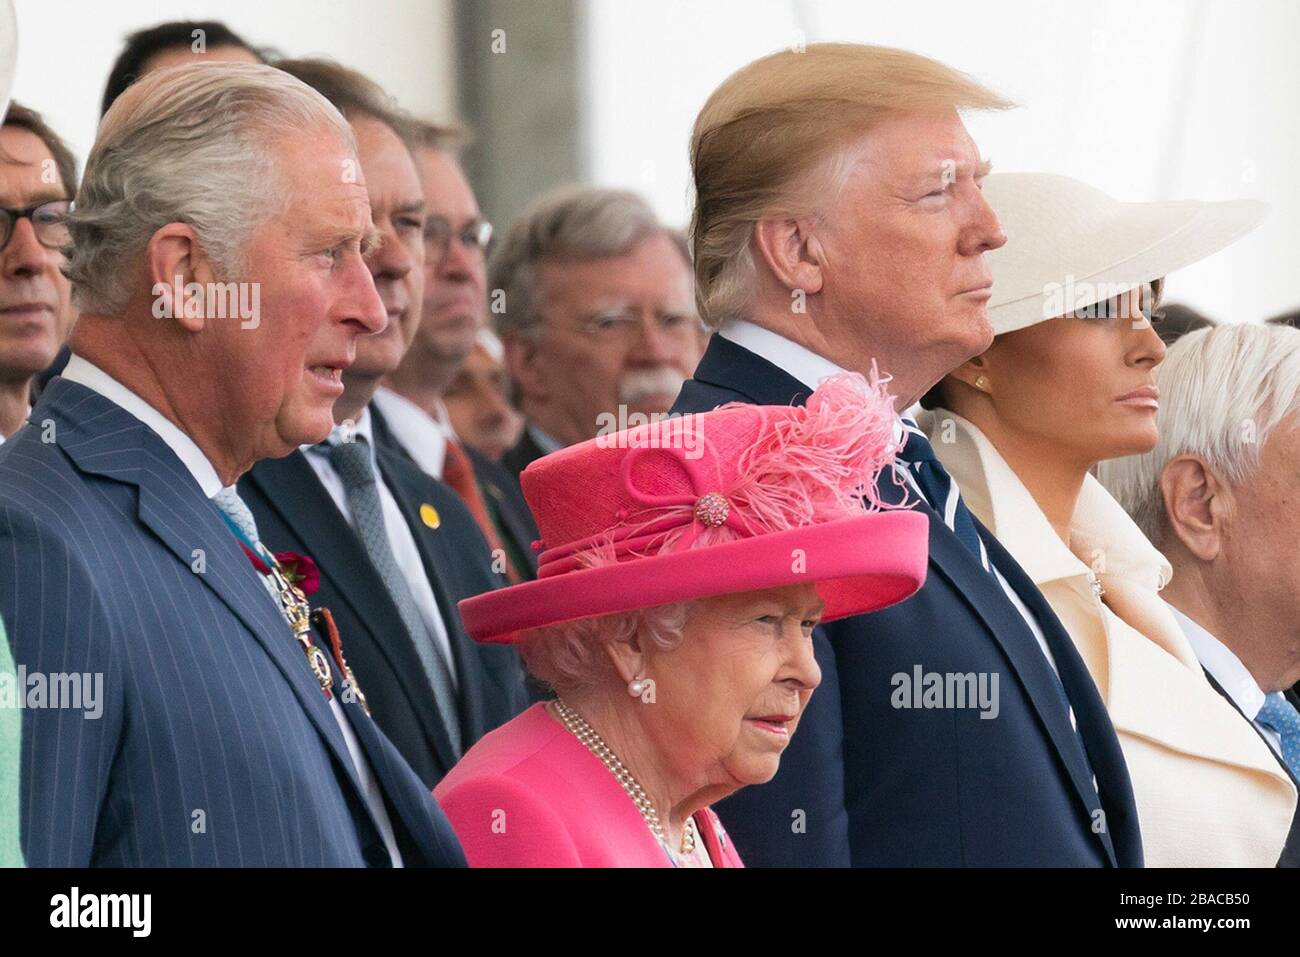 President Donald Trump and First Lady Melania Trump, with Queen Elizabeth II, Prince Charles, and other world leaders at the D-Day National Commemoration, Portsmouth, England, June 5, 2019  (BSLOC 2019 6 213) Stock Photo